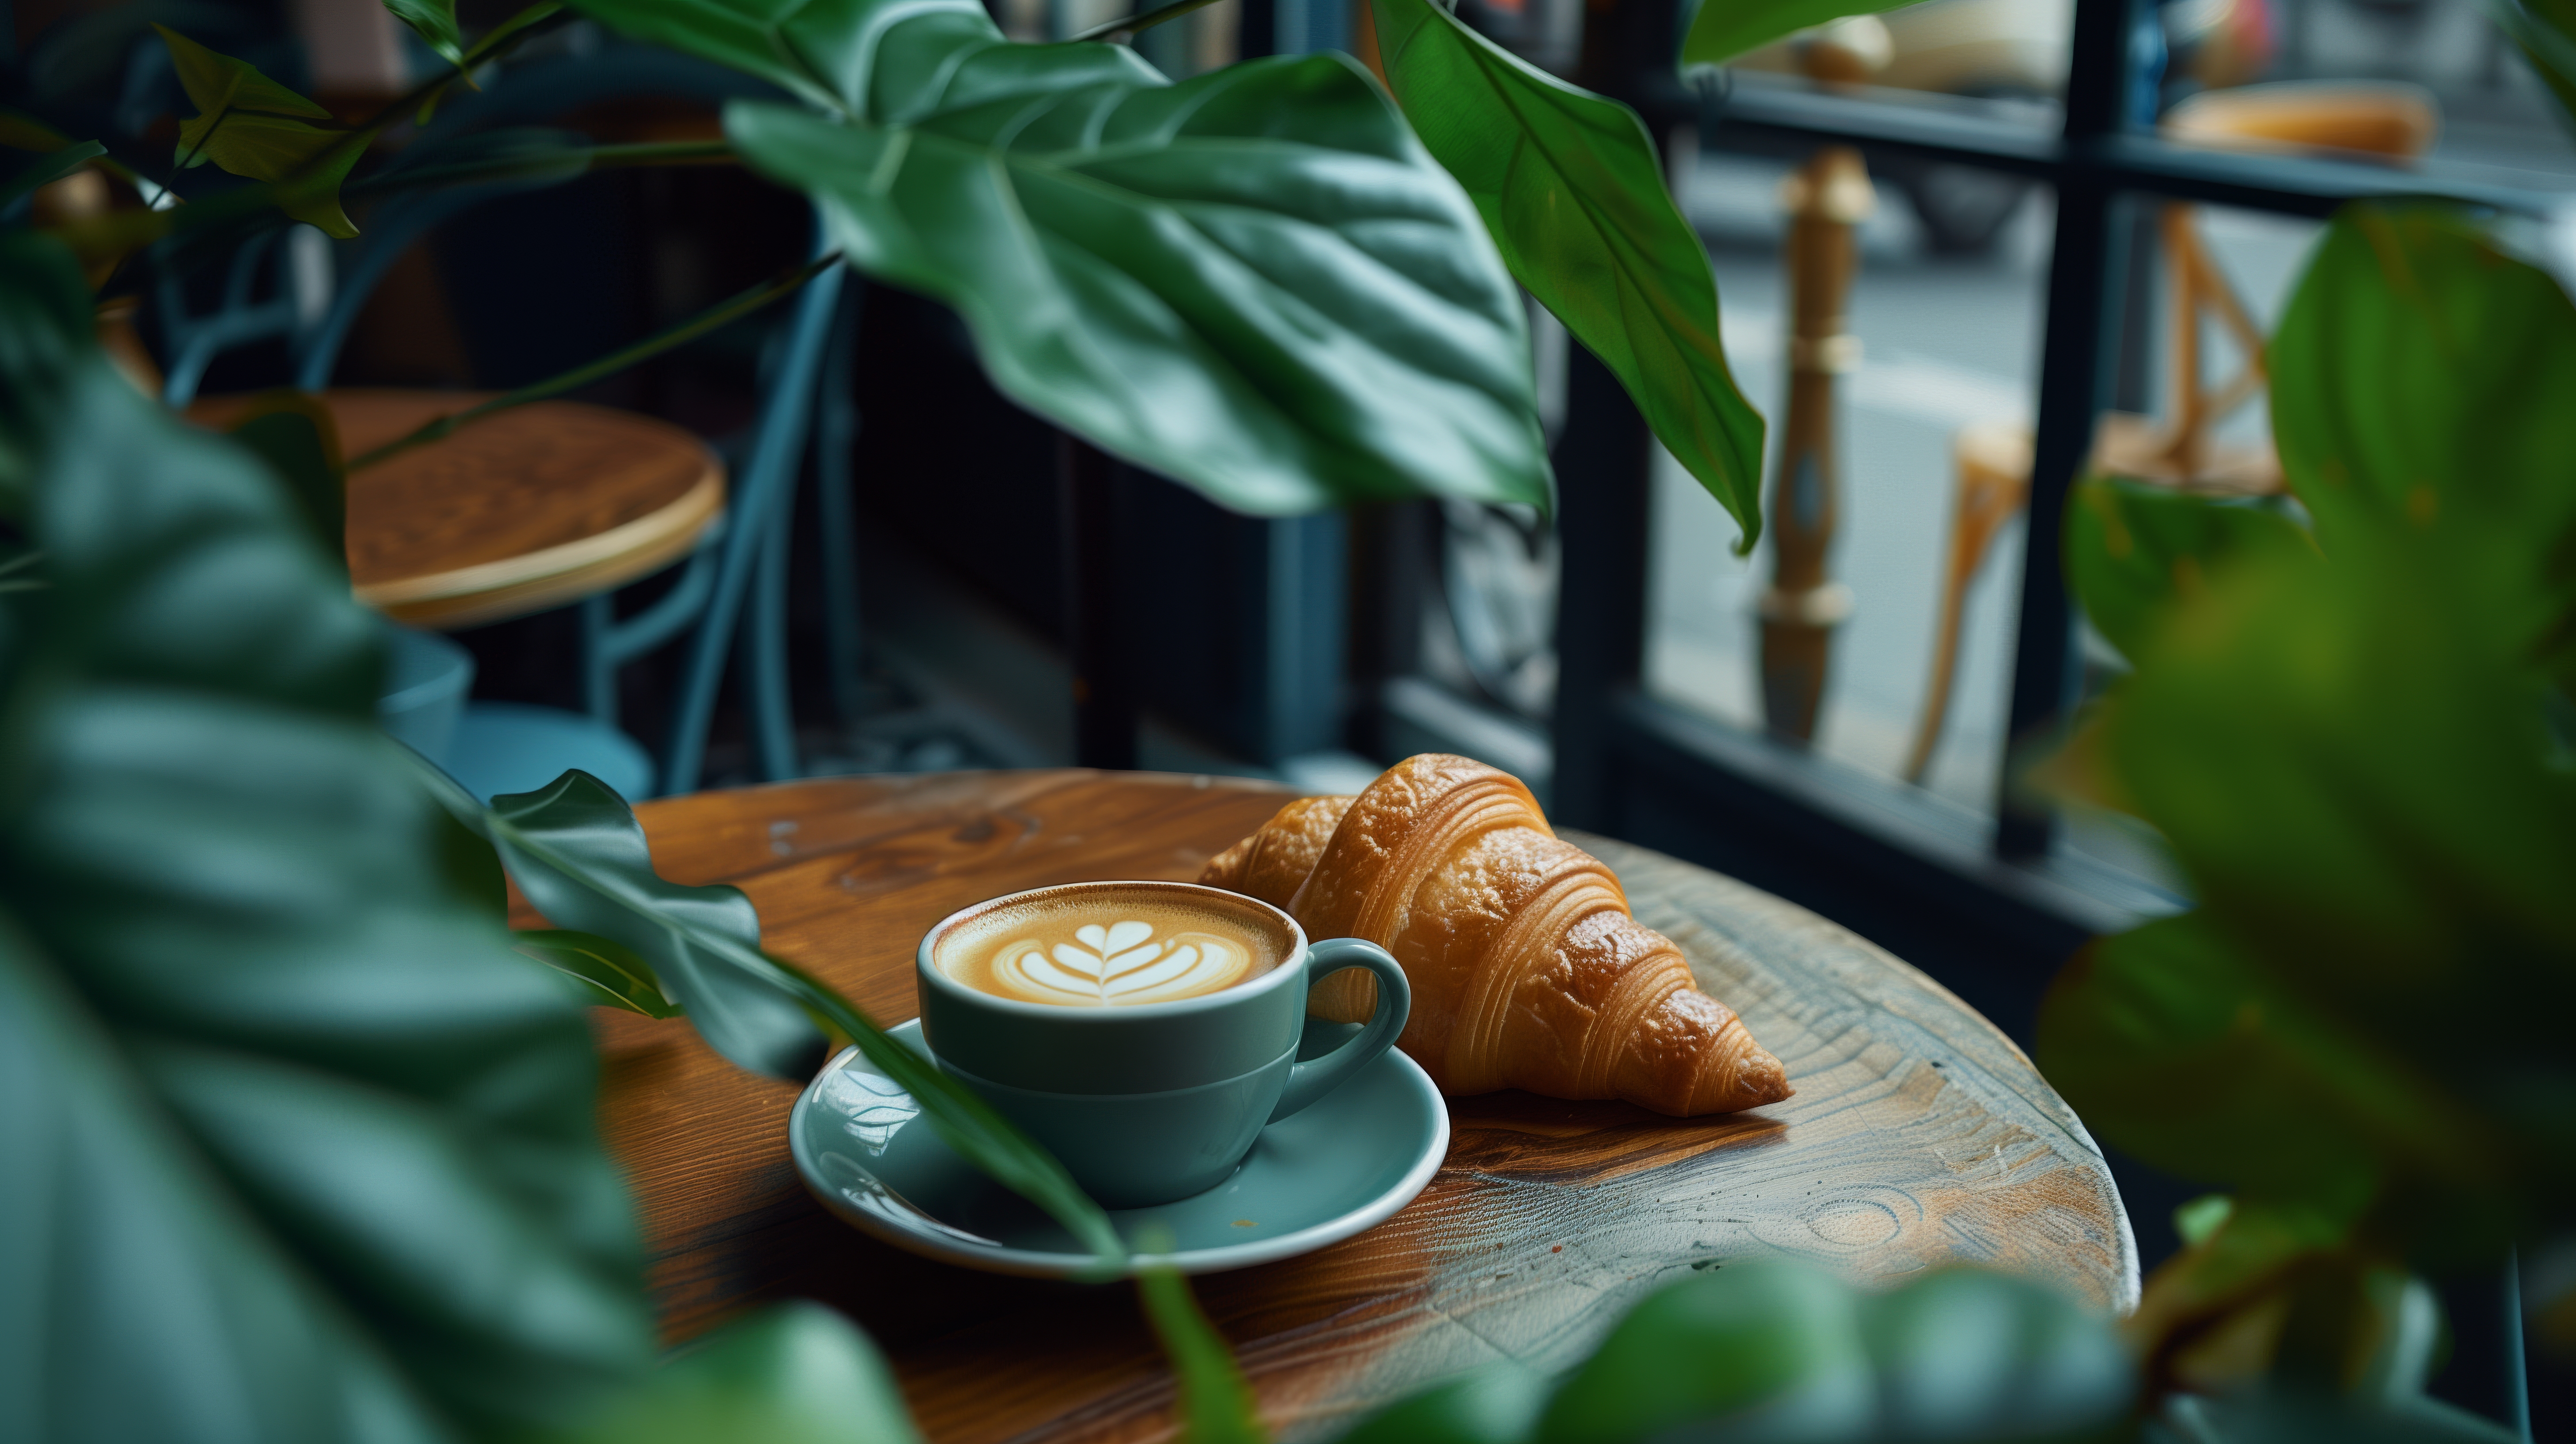 General 5824x3264 AI art croissants cappuccino coffee cafe plants